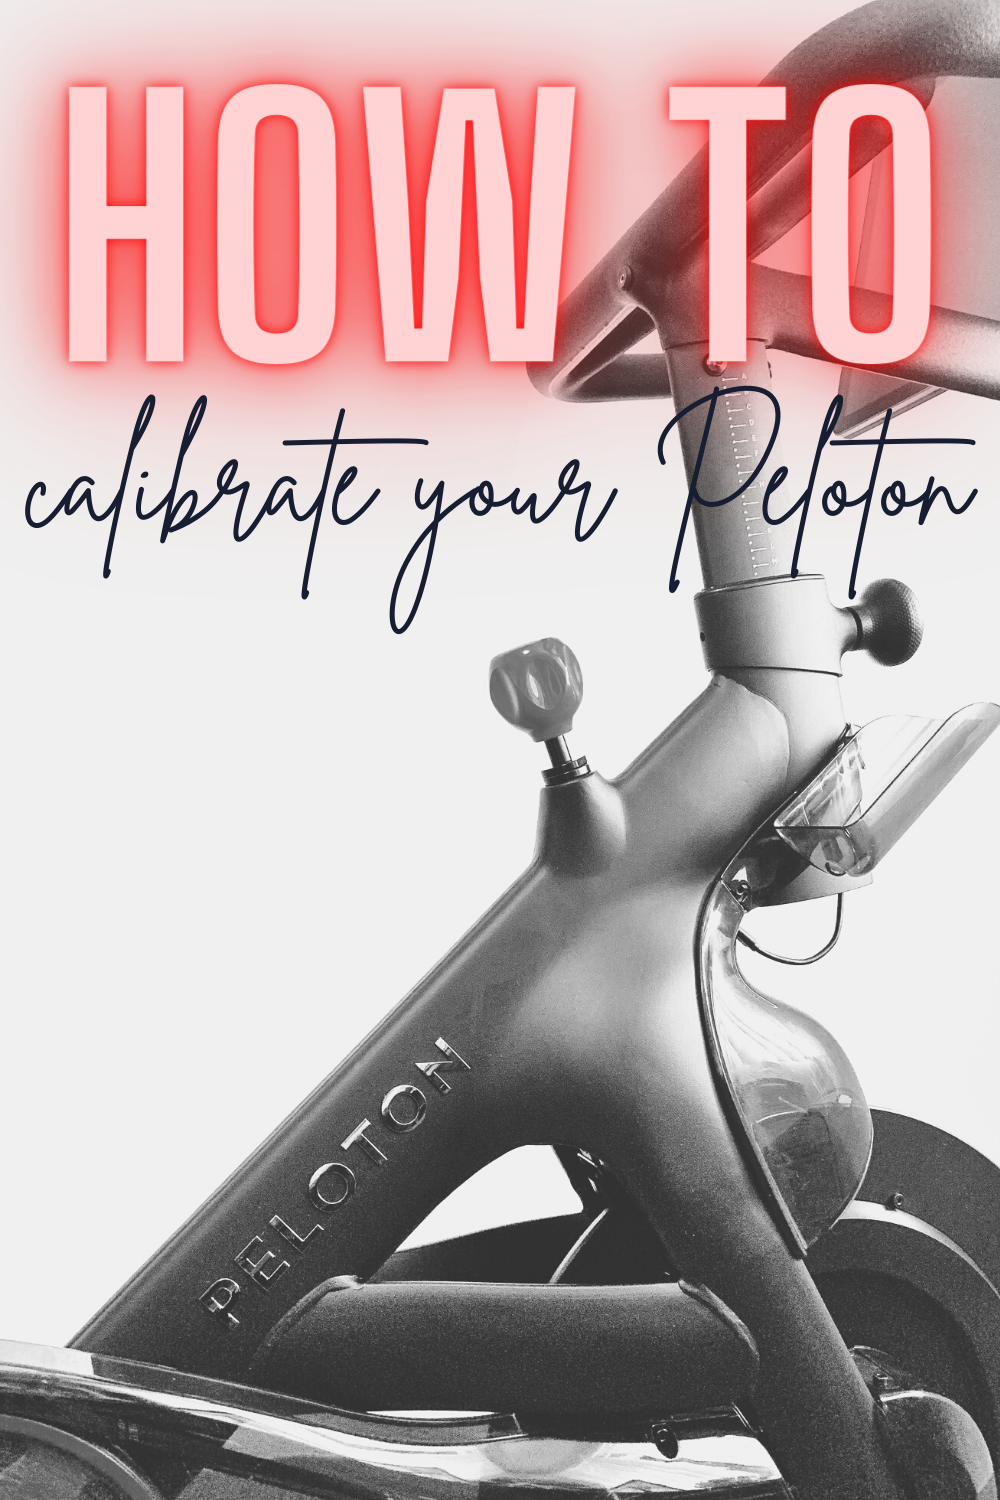 How To Calibrate Your Peloton Bike - Trying figure out Peloton bike calibration? Here's how to calibrate a Peloton bike at home. | Peloton Bike Plus Calibration | How To Calibrate Peloton Bike